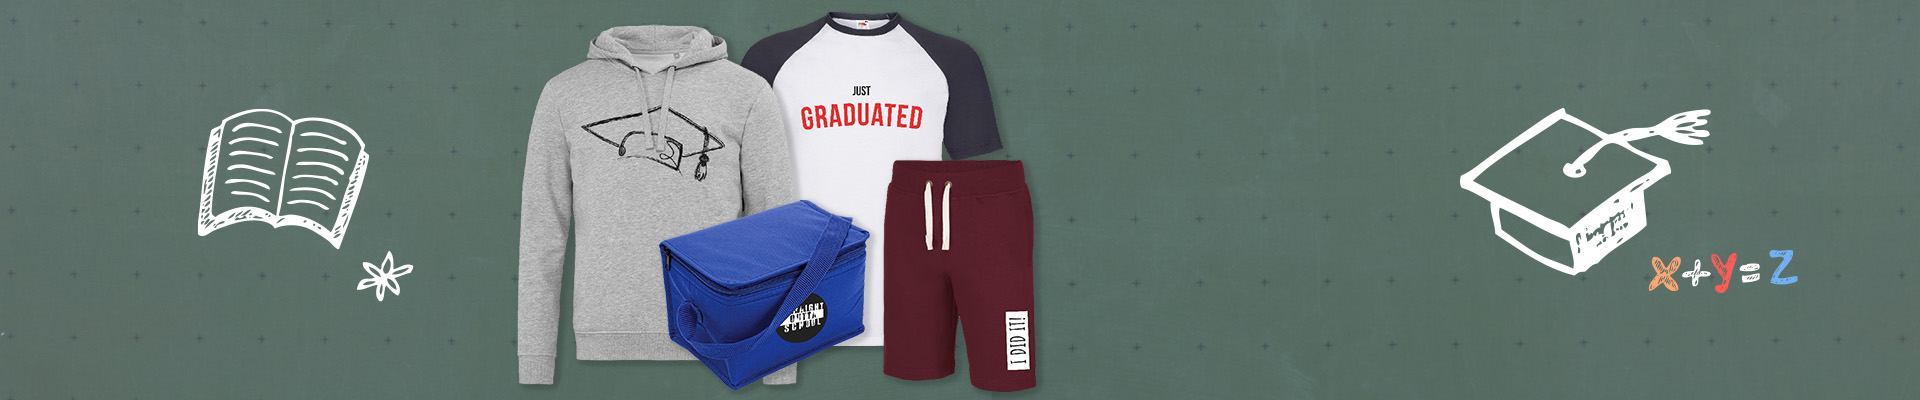 L-SHOP-TEAM supplies everything you might possibly need for a perfect graduation ceremony
